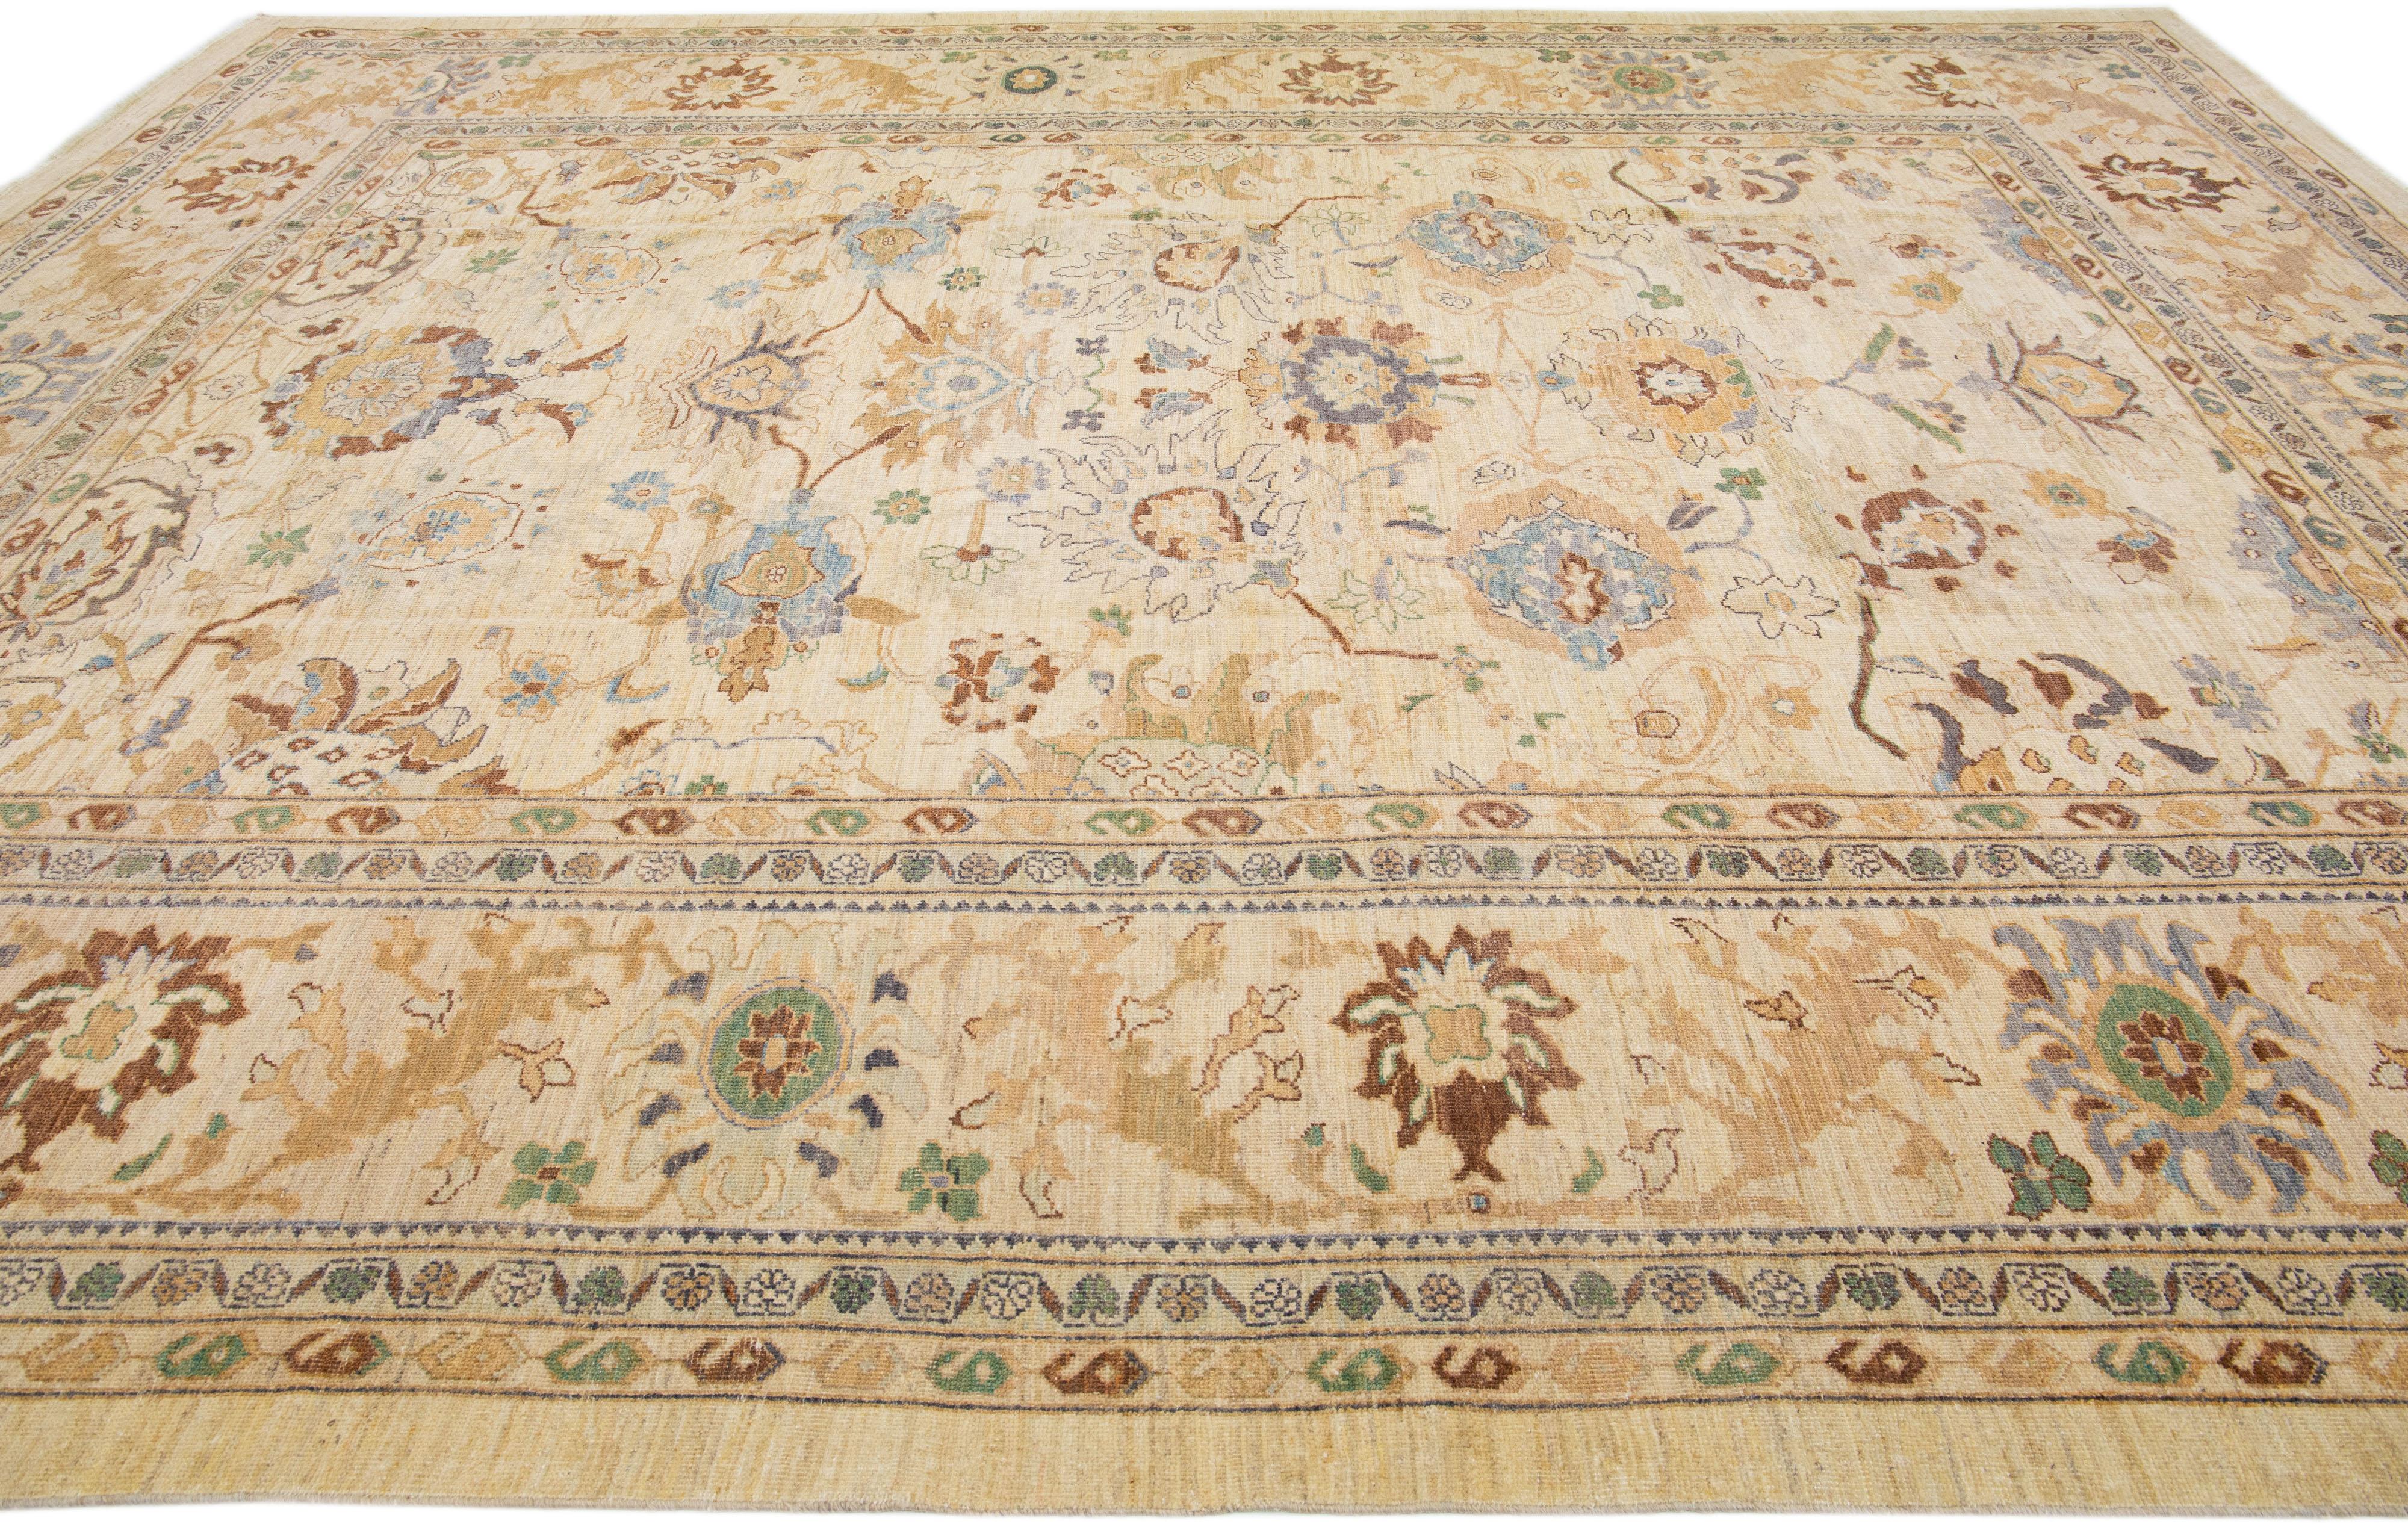 21st Century Sultanabad Beige Handmade Persian Wool Rug with Floral Motif For Sale 1